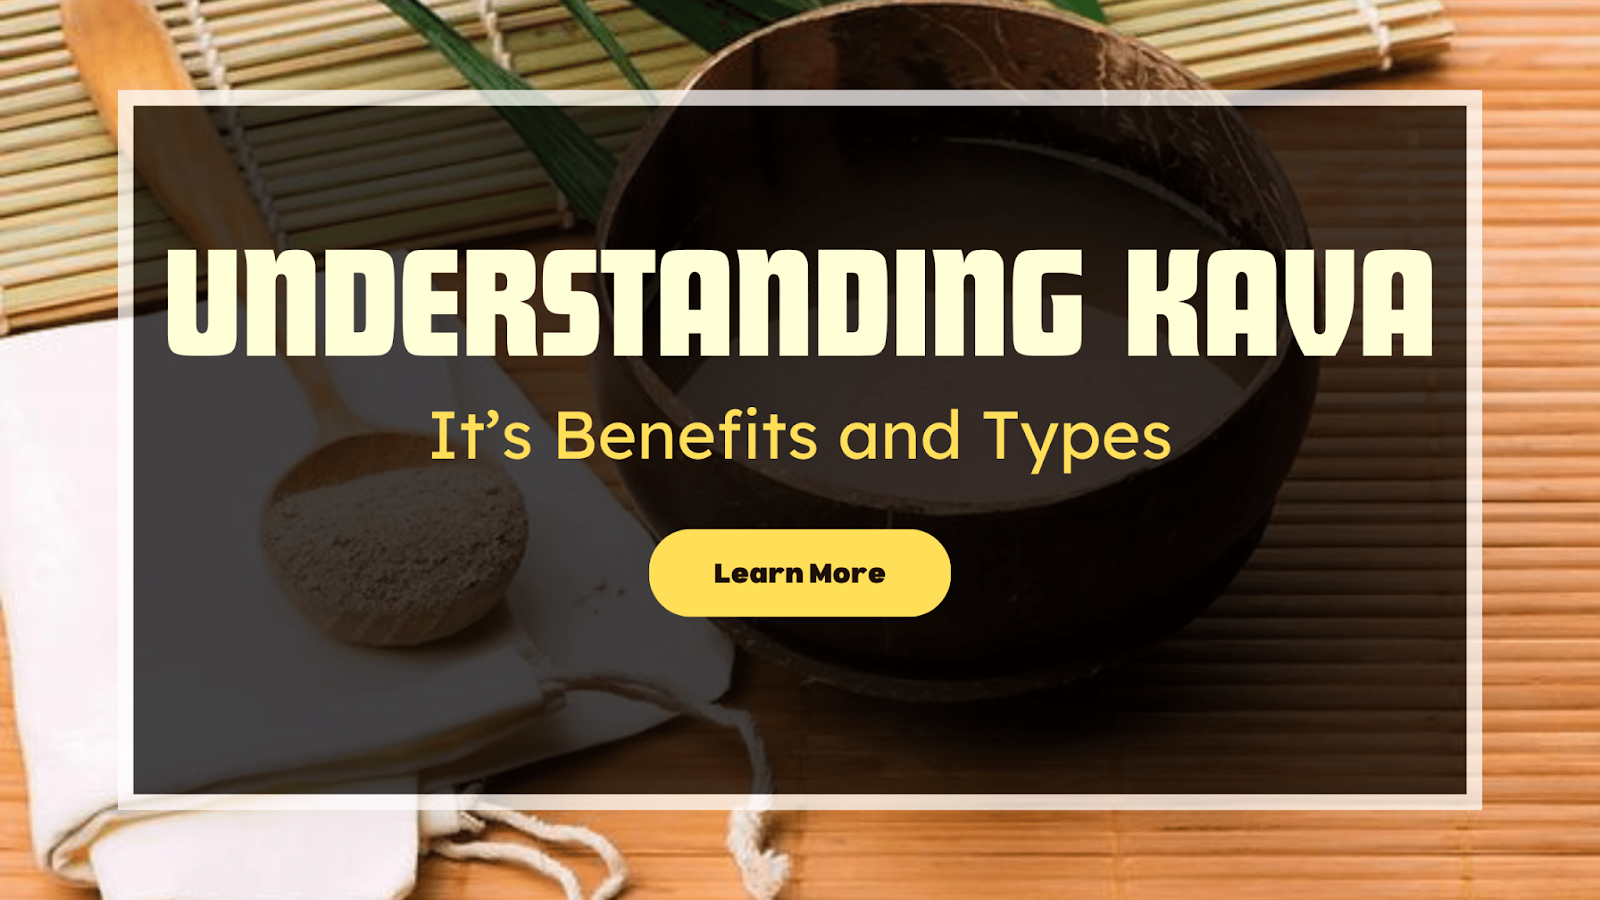 kava benefits and types infographic banner